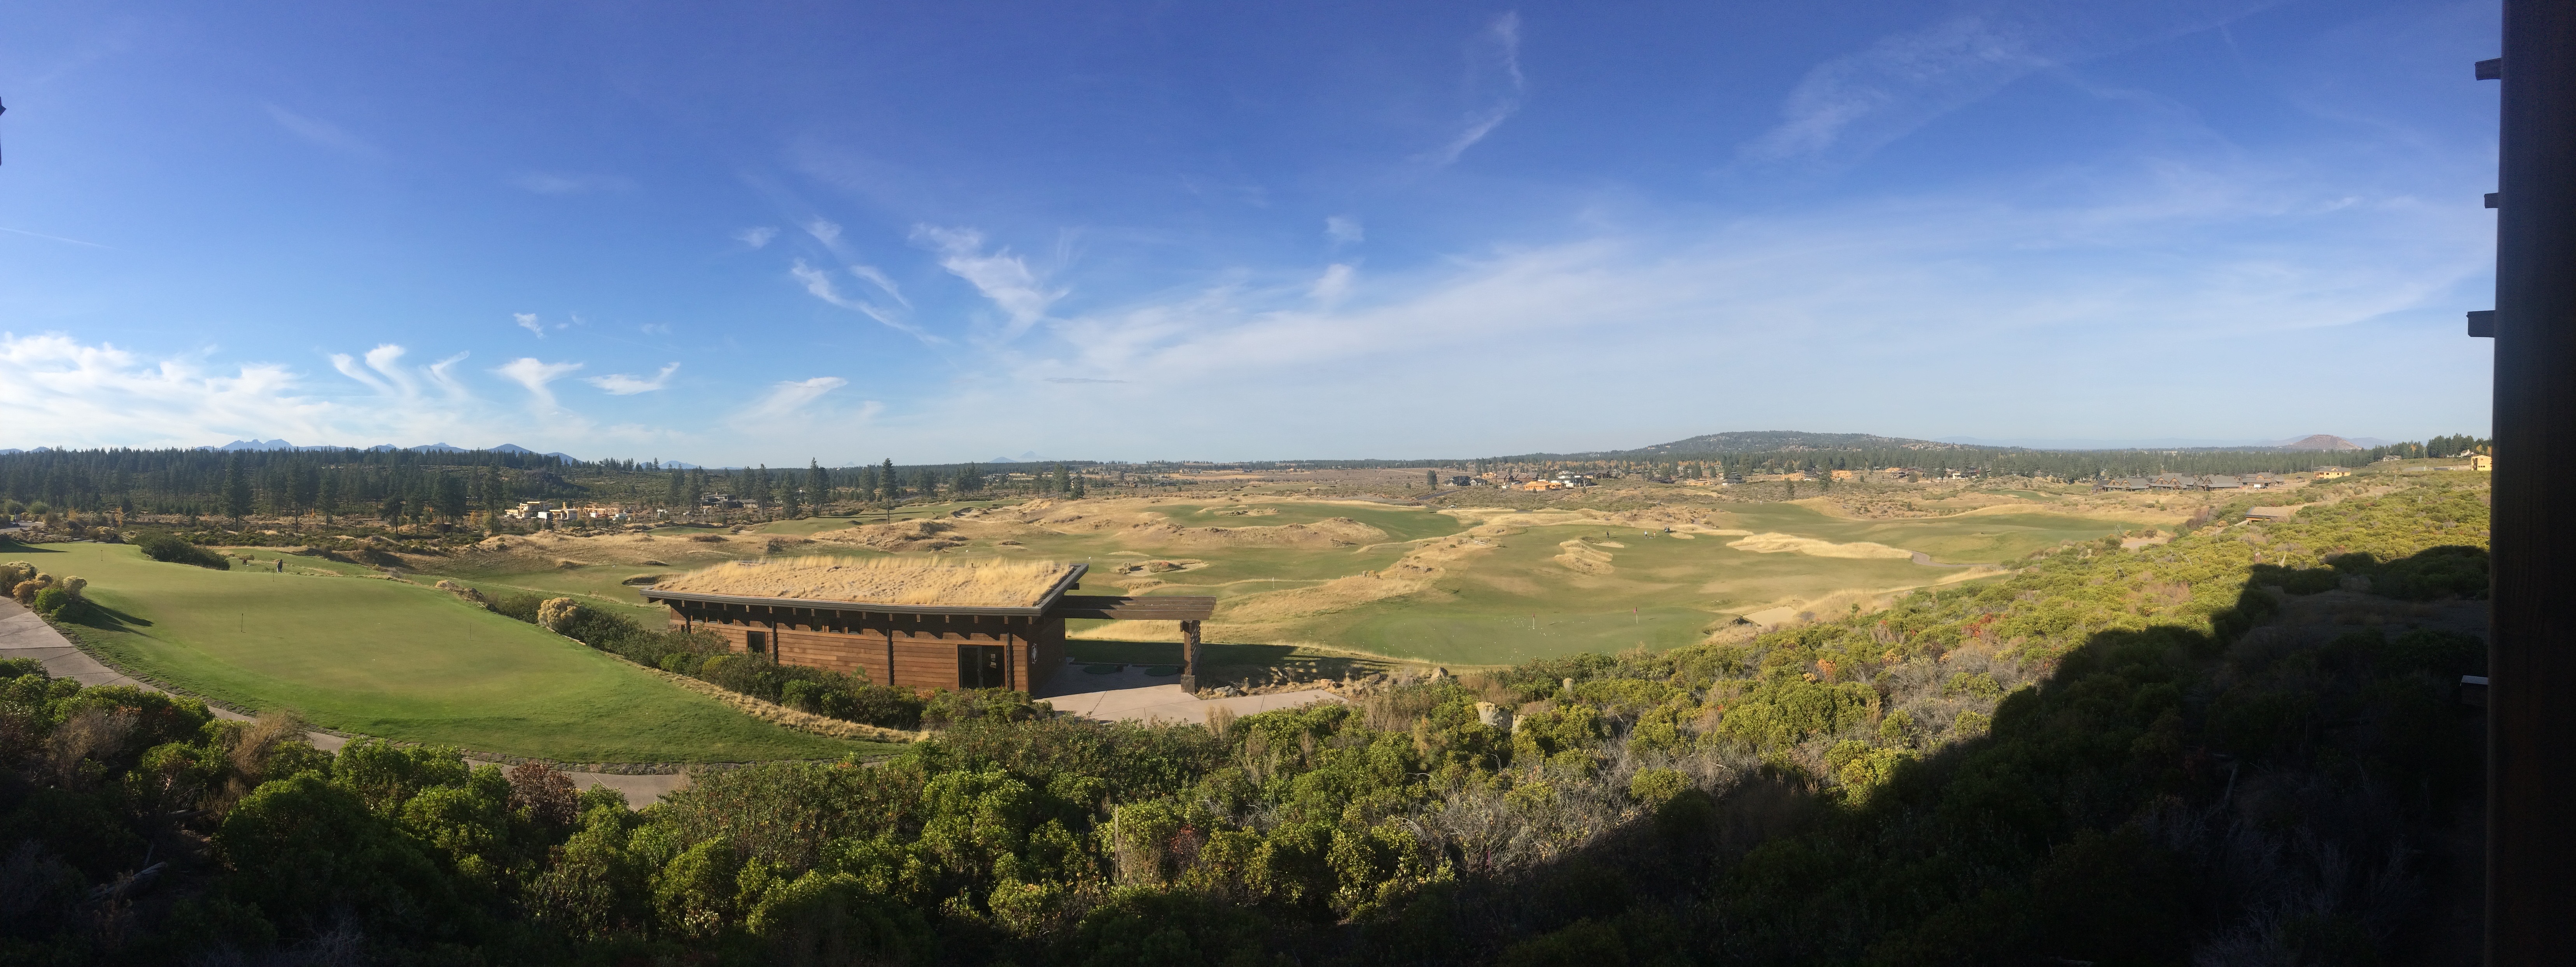 Panoramic view of the Tetherow Golf Course in Bend, Oregon